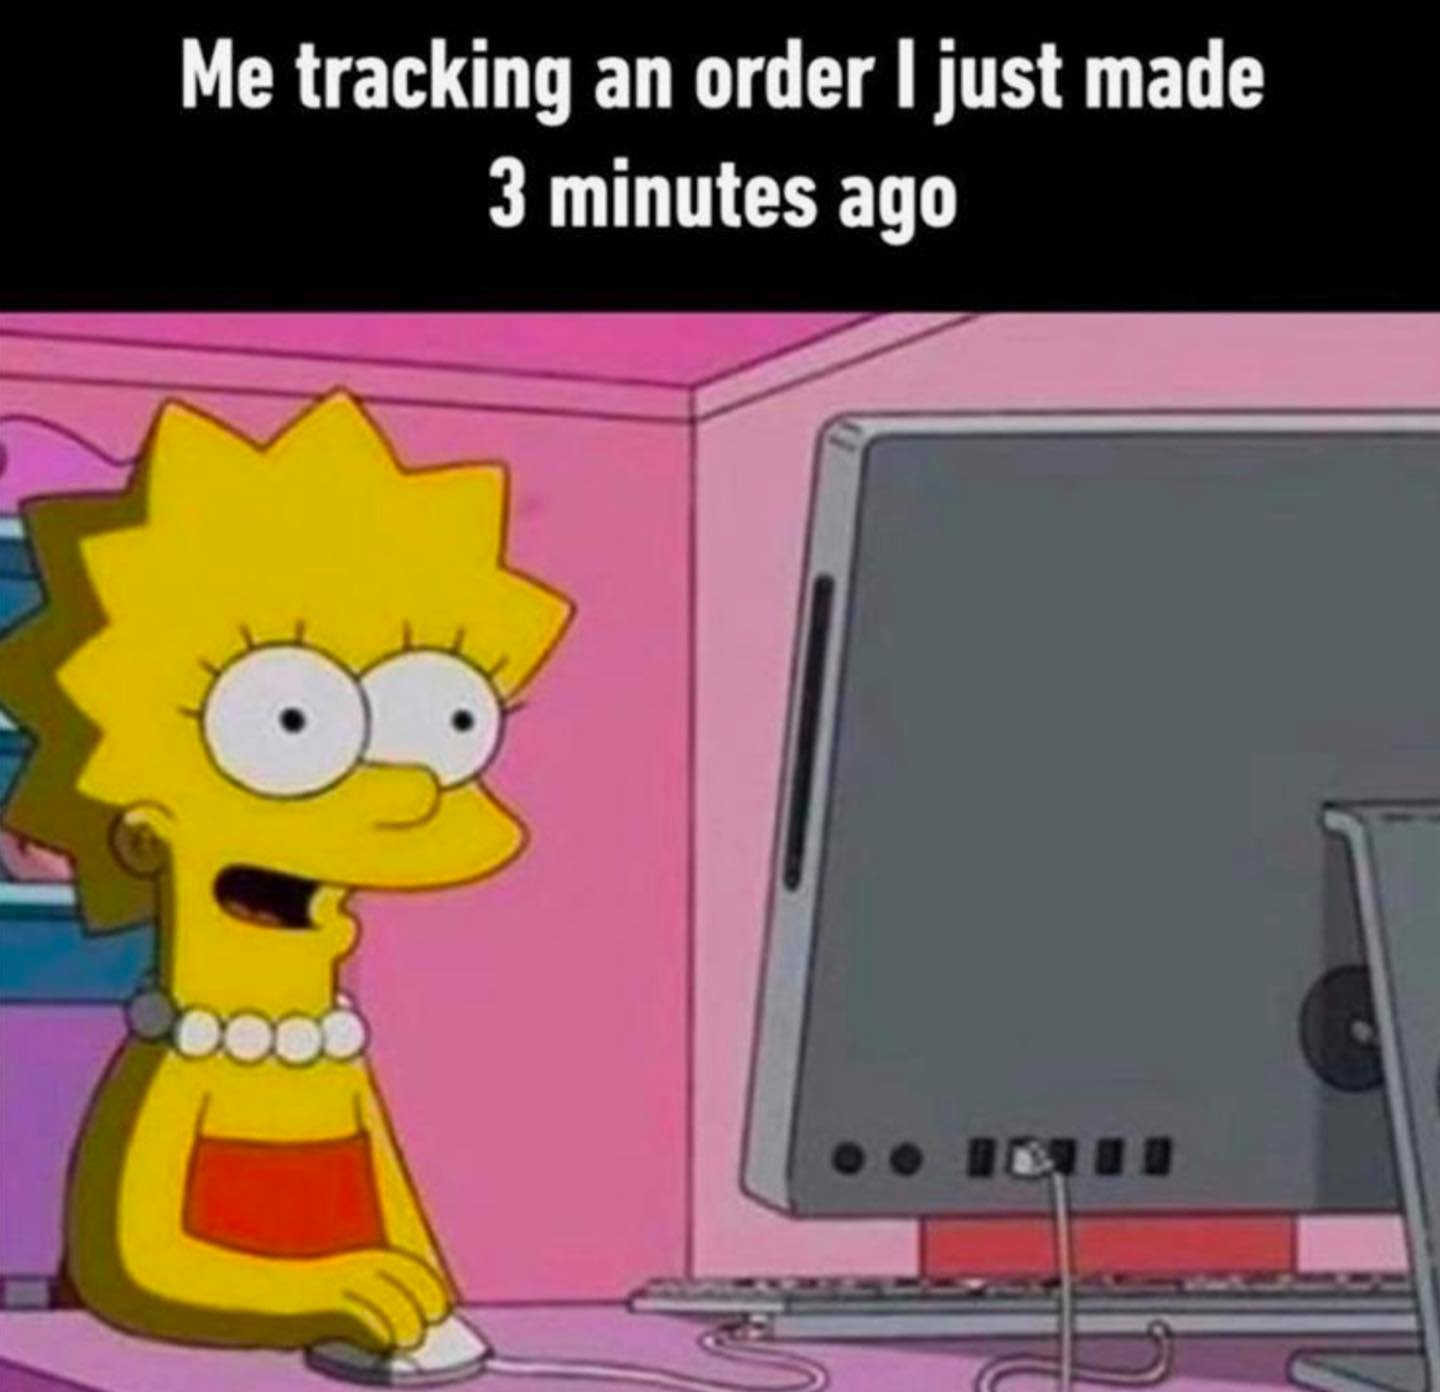 my impatient ass tracking an order - Me tracking an order I just made 3 minutes ago